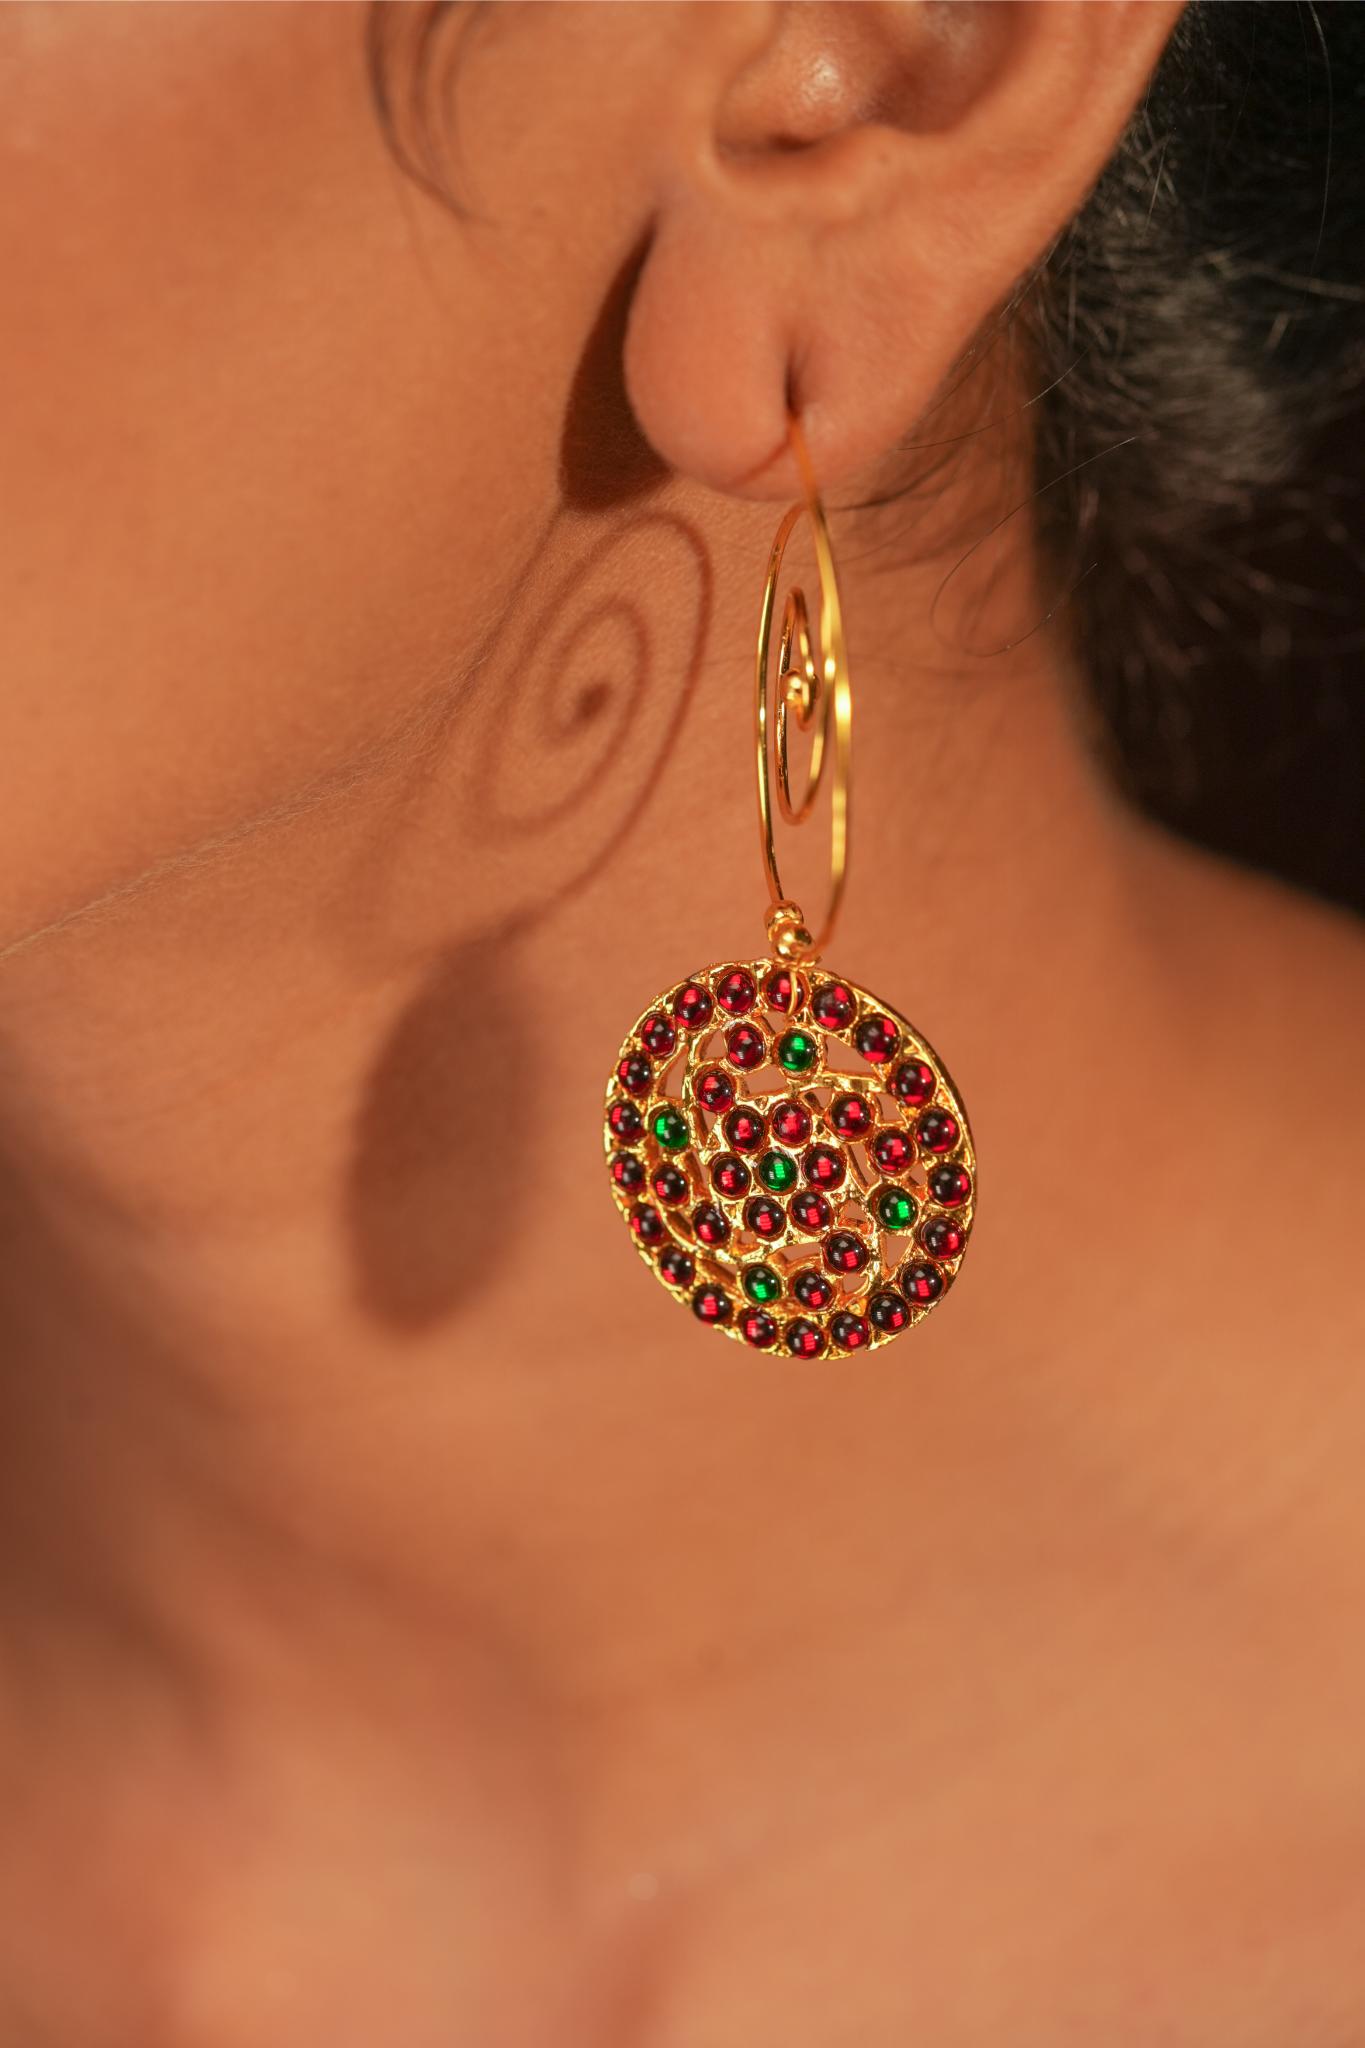 Contemporary Earring with Spiral Hook and Round Motif - CiceroniEarringsAarika